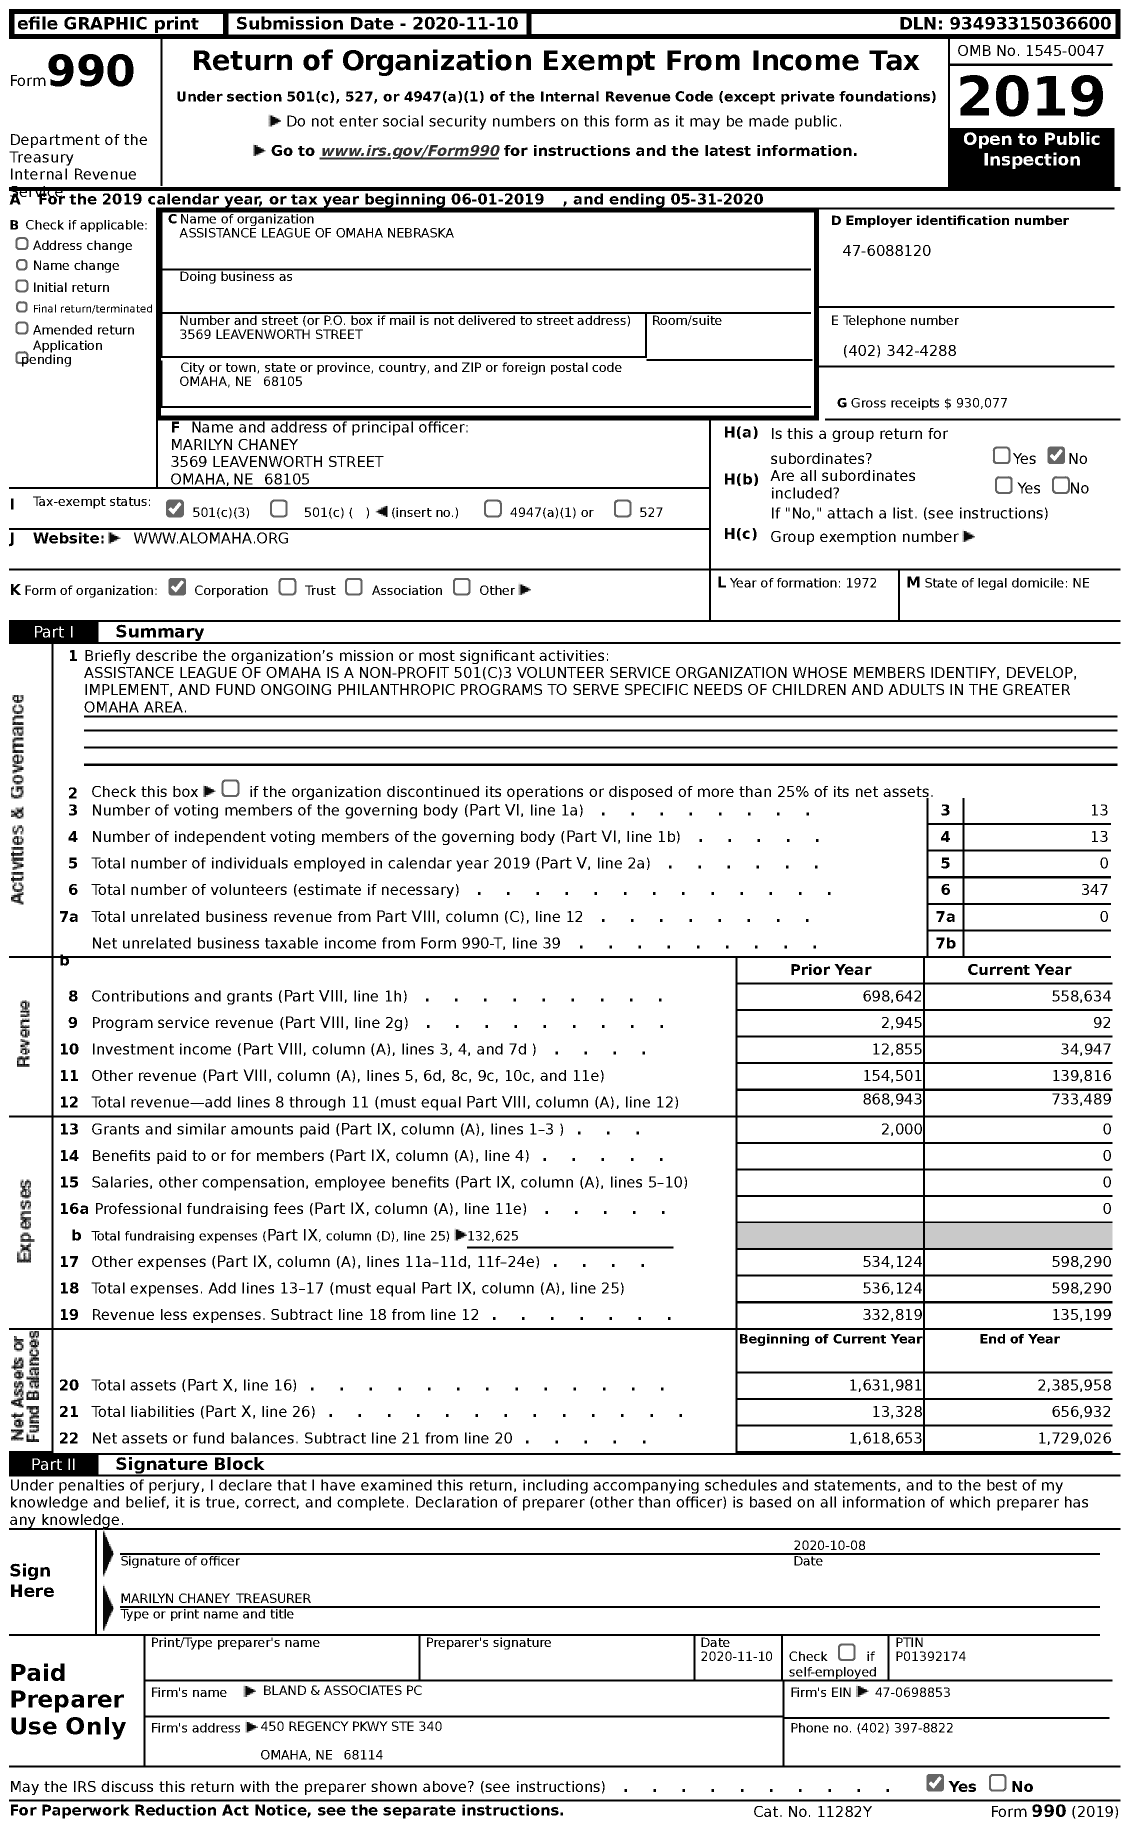 Image of first page of 2019 Form 990 for Assistance League of Omaha Nebraska